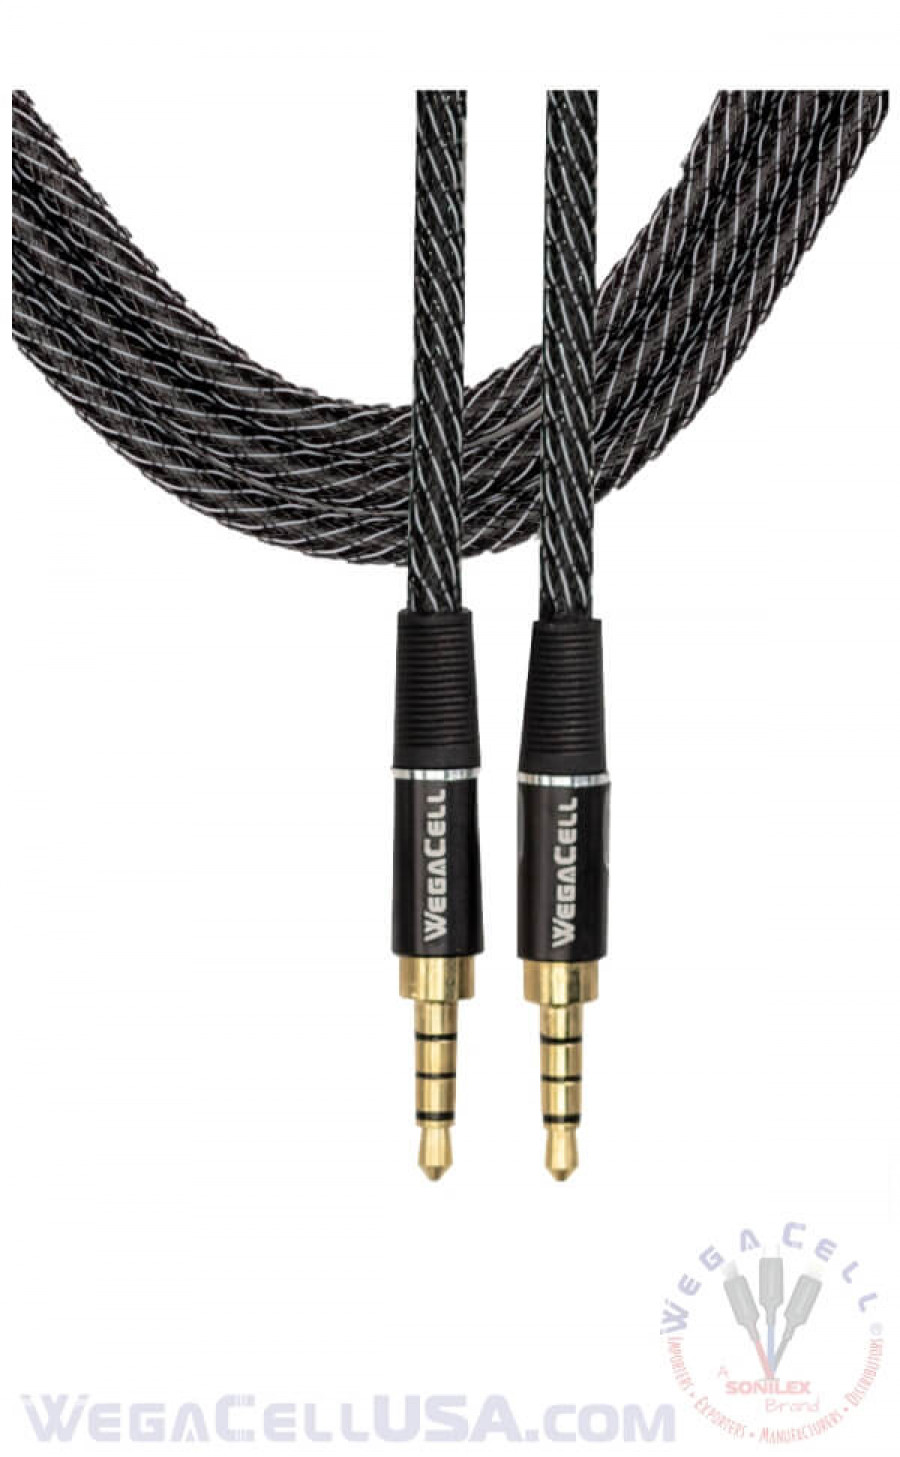 hifi stereo sound braided 5 ft - aux cable - wholesale pkg. wegacell: wl-5ft09-ax aux cable 28